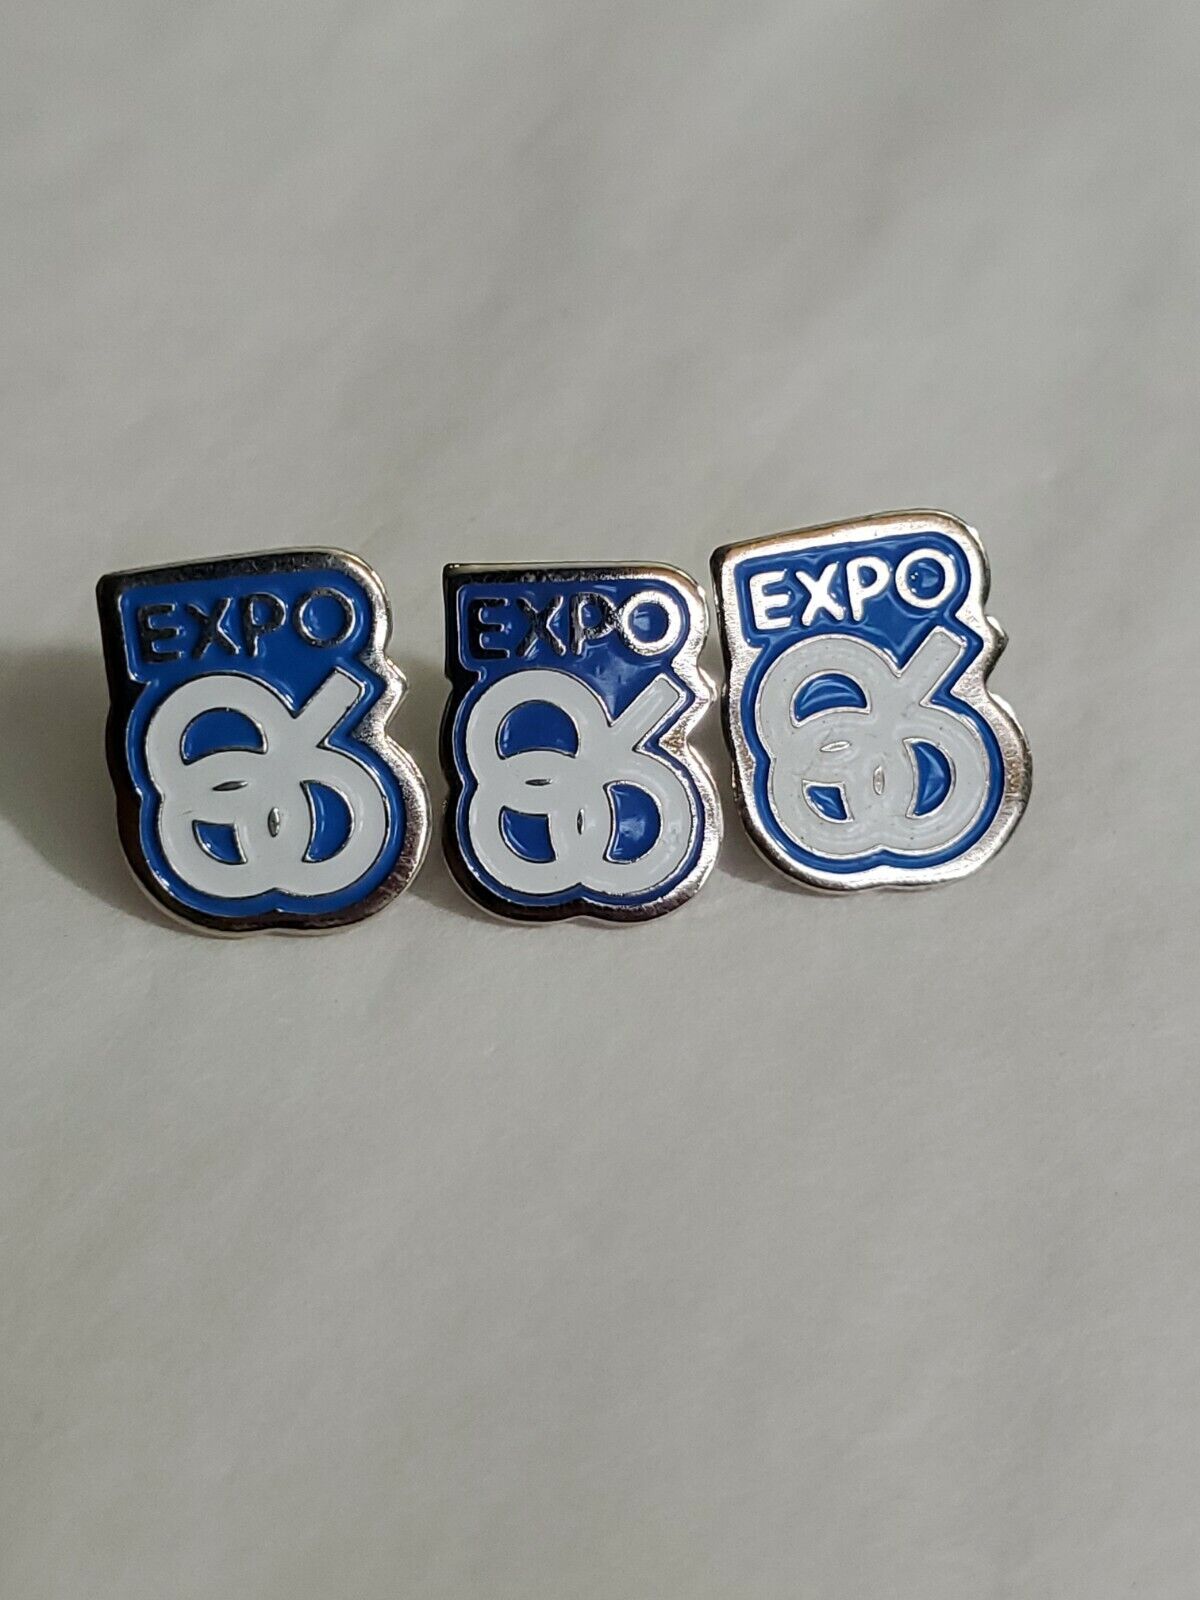 Expo 86 Pin Lot Of 3 Vancouver British Columbia Canada World's Fair Blue White